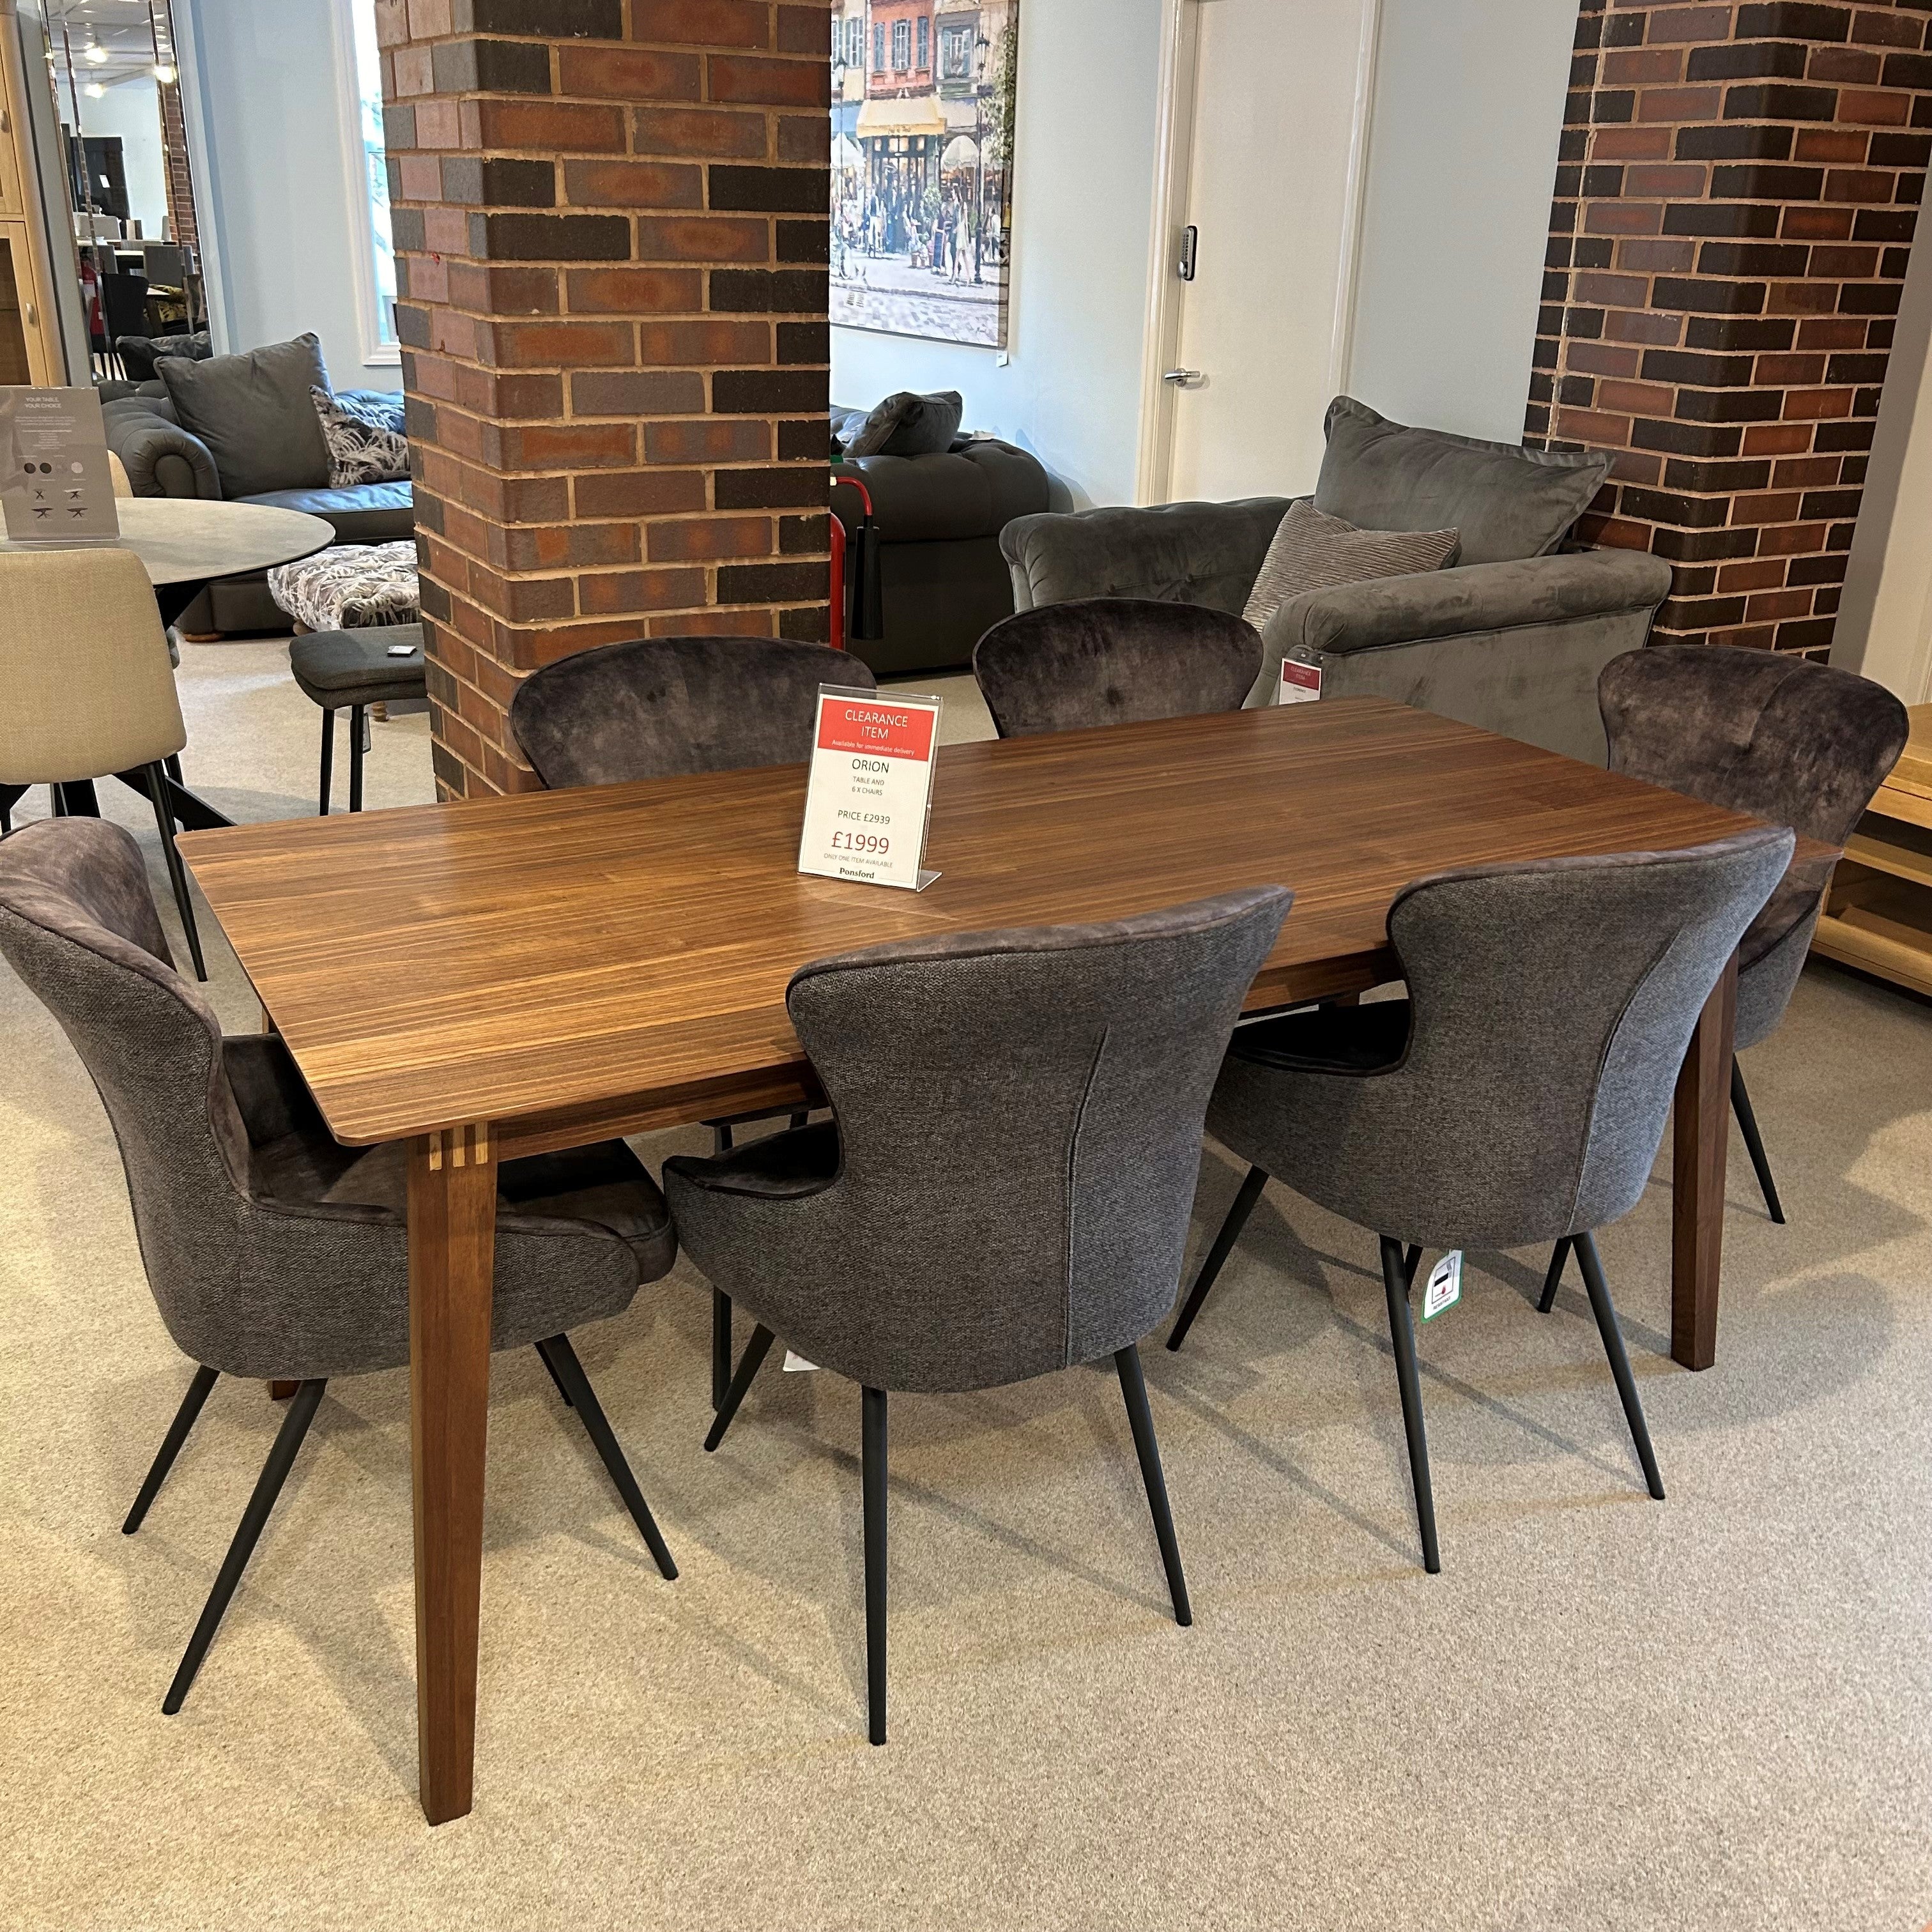 Orion Table & 6 Chairs